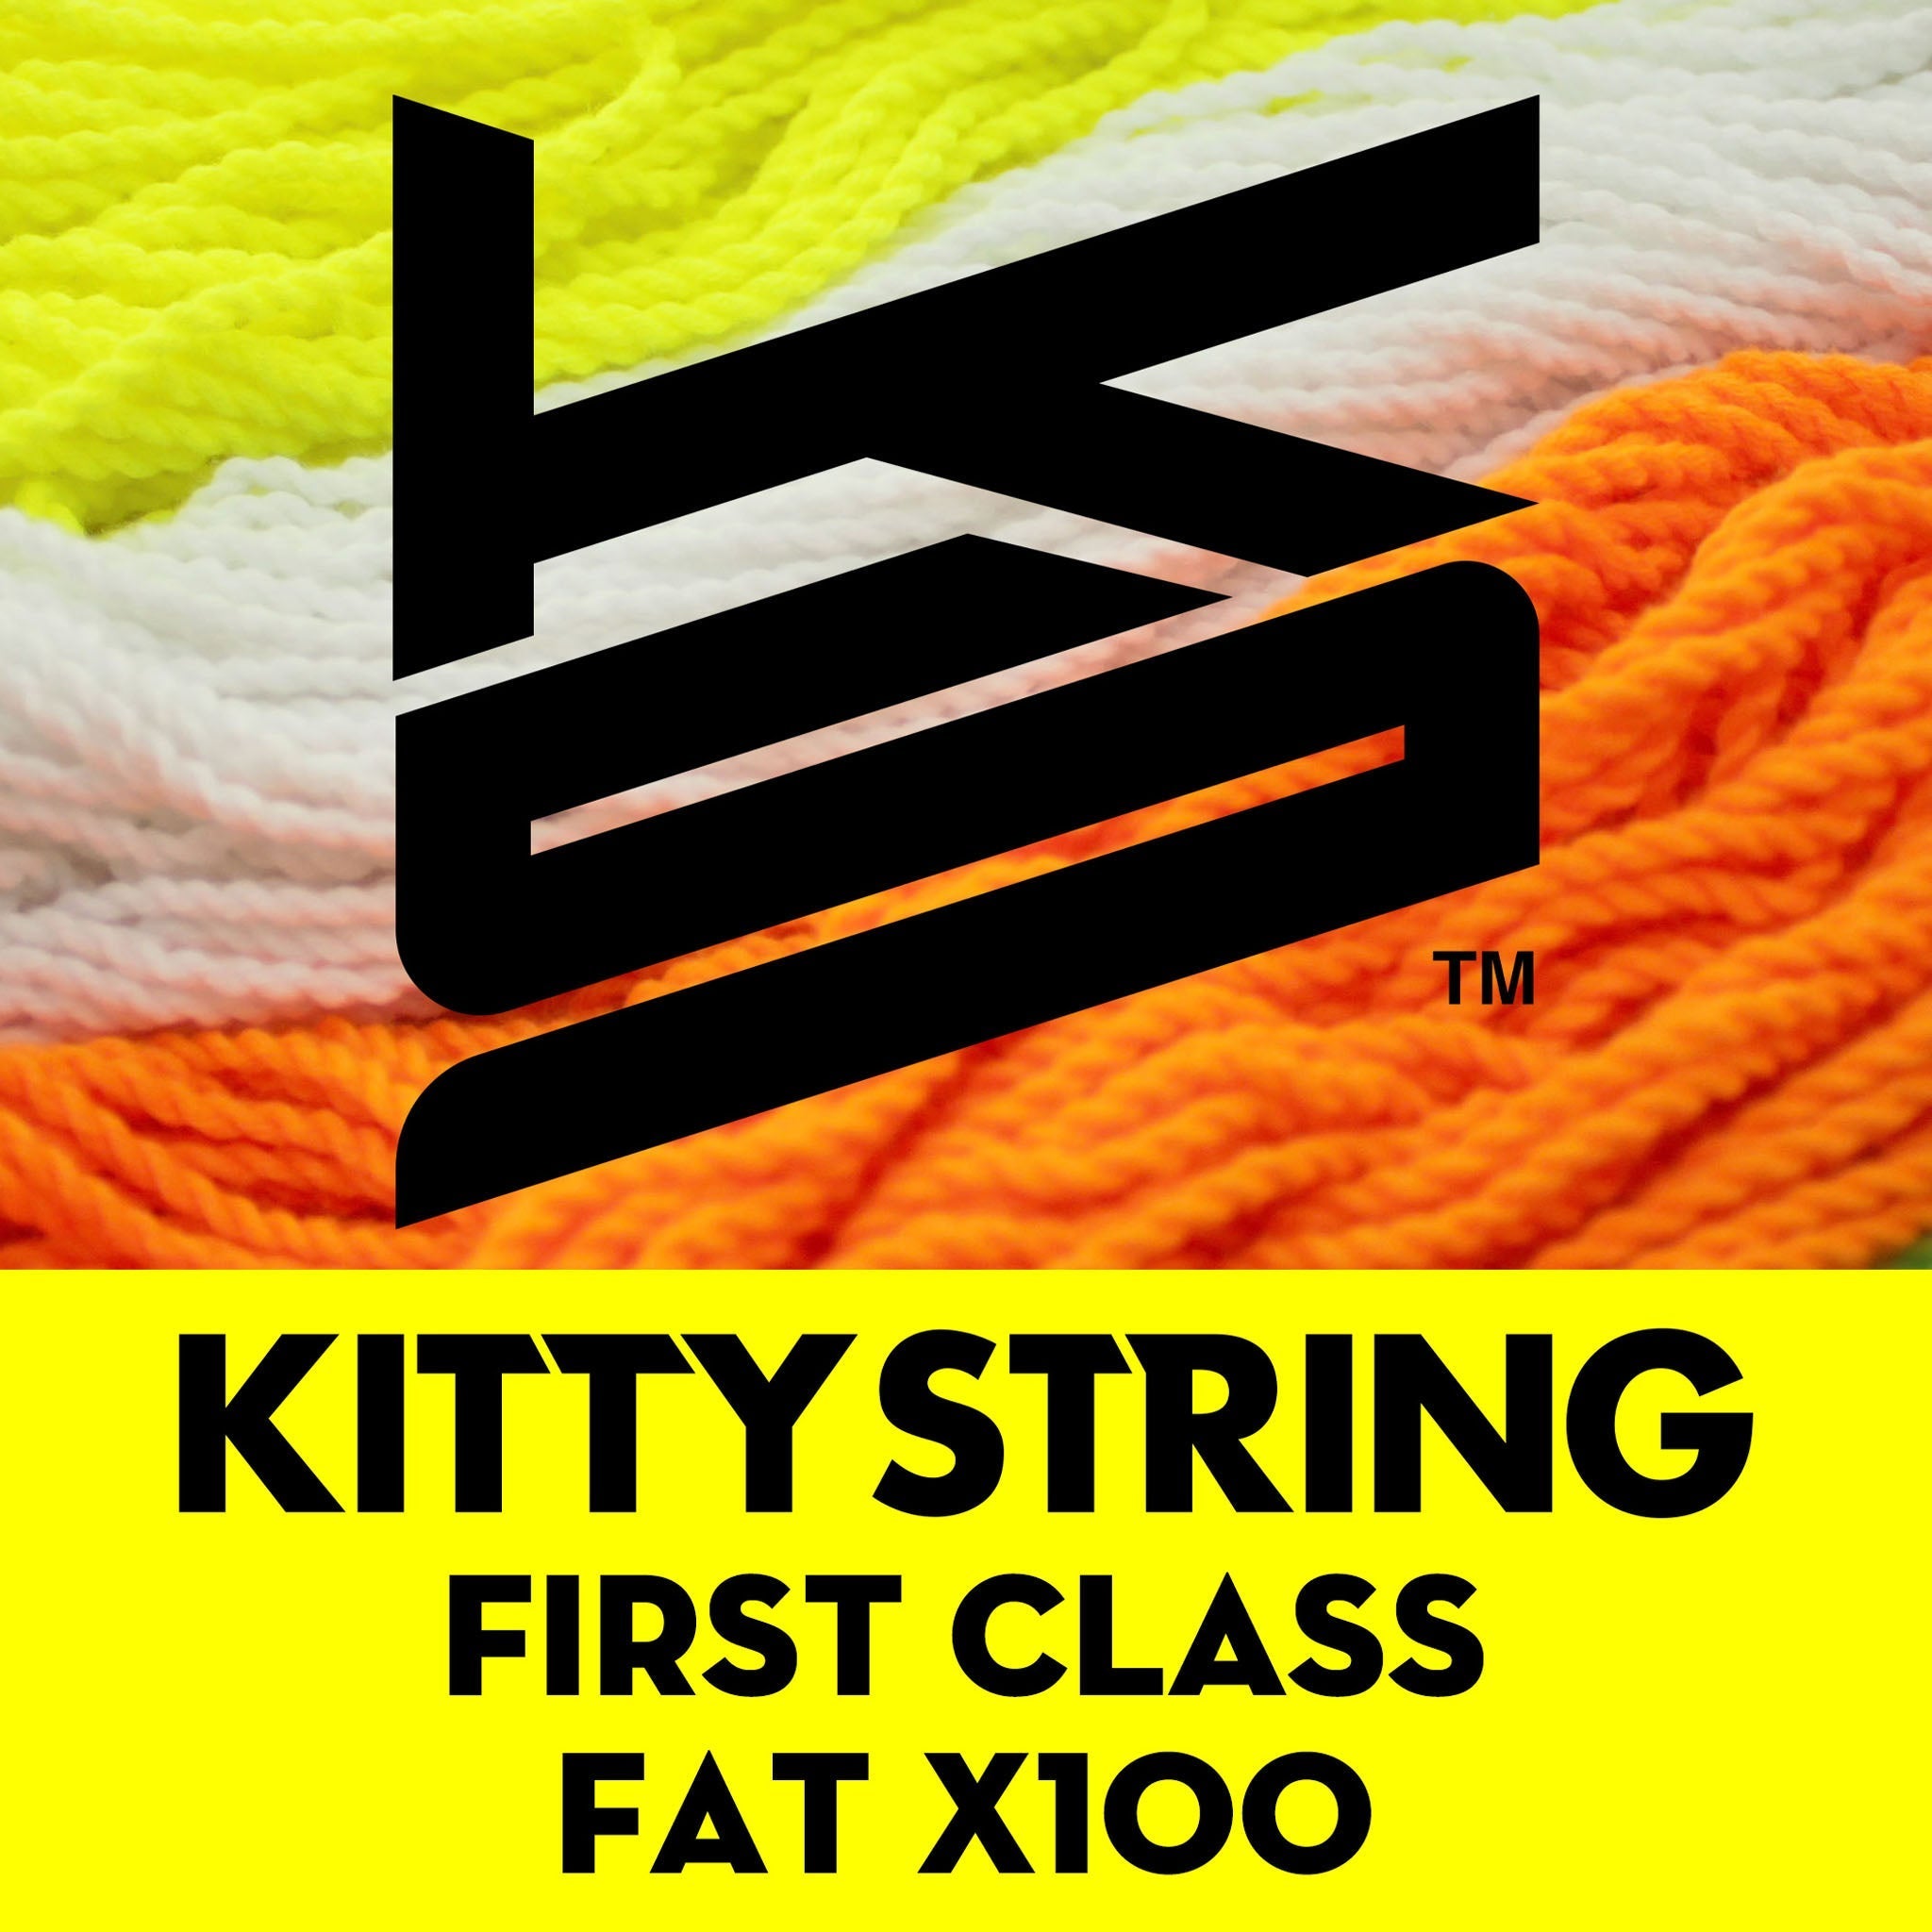 Kitty String (Poly100%) "First-Class" Fat x100 - Kitty Strings